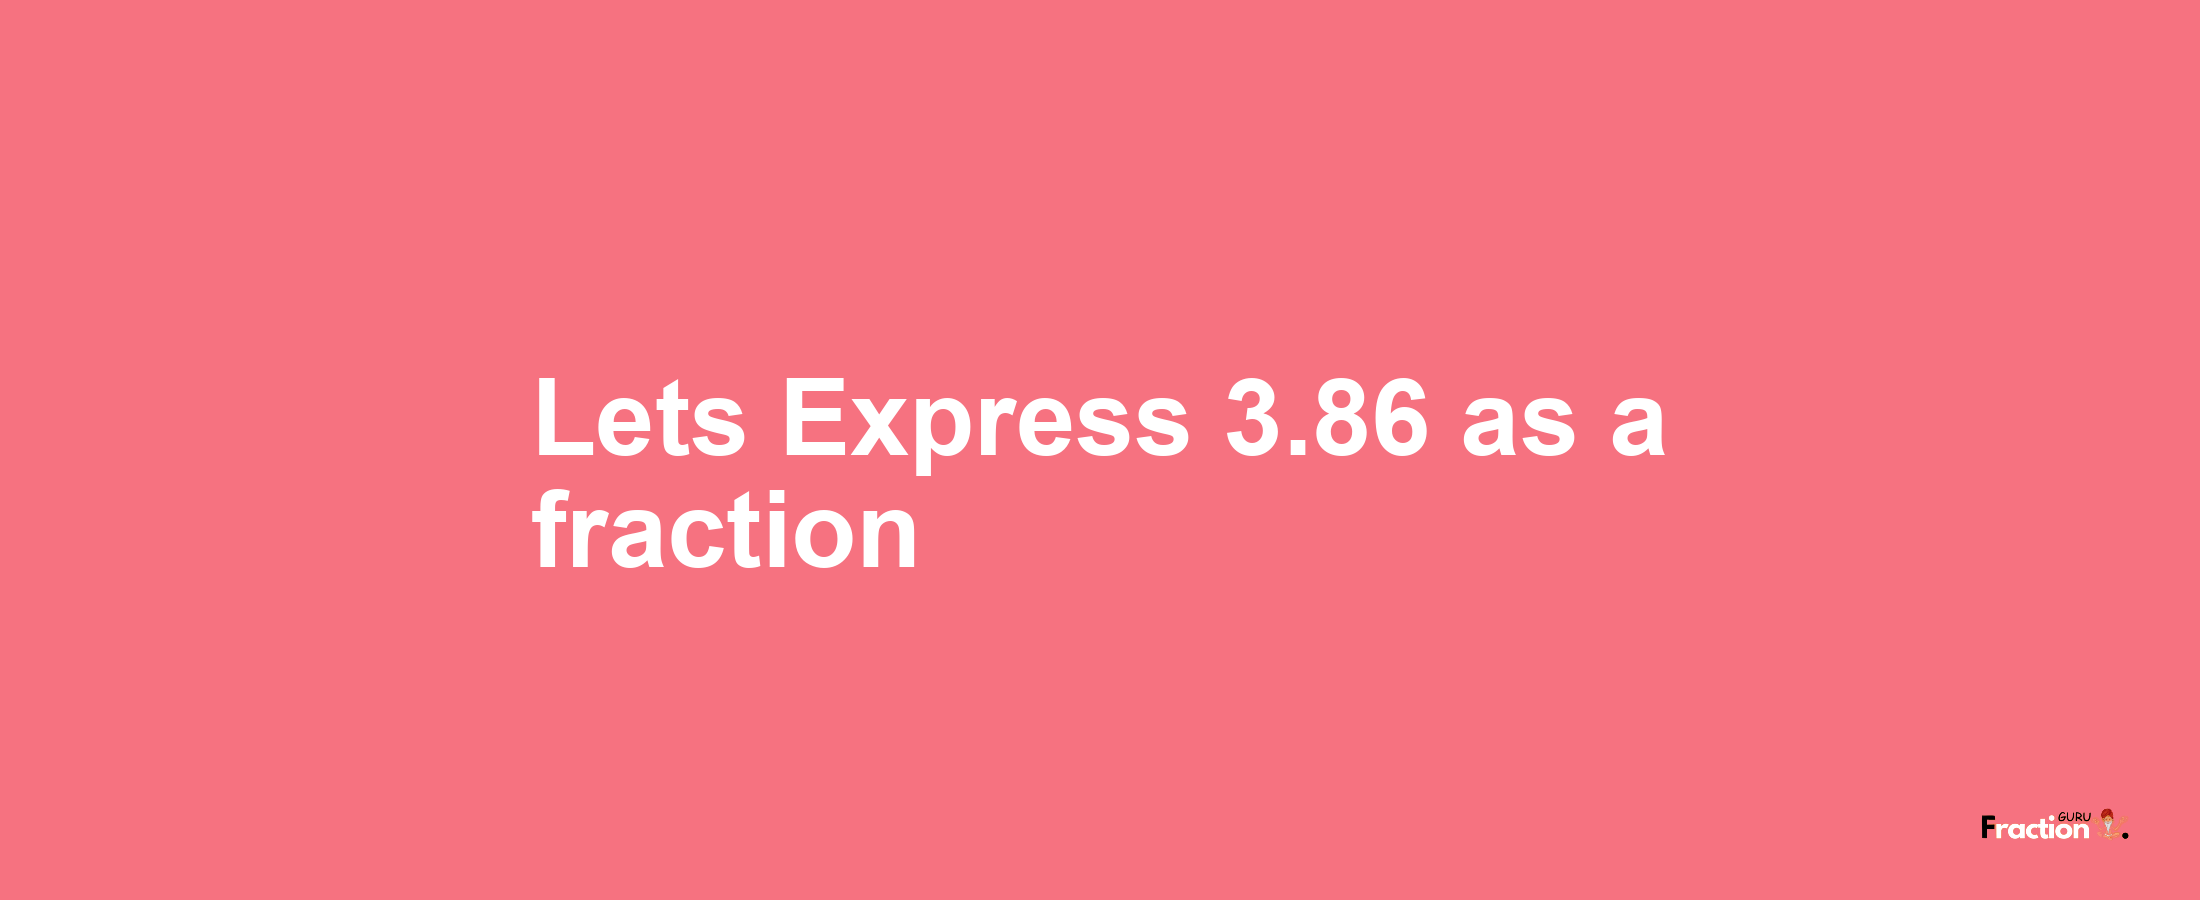 Lets Express 3.86 as afraction